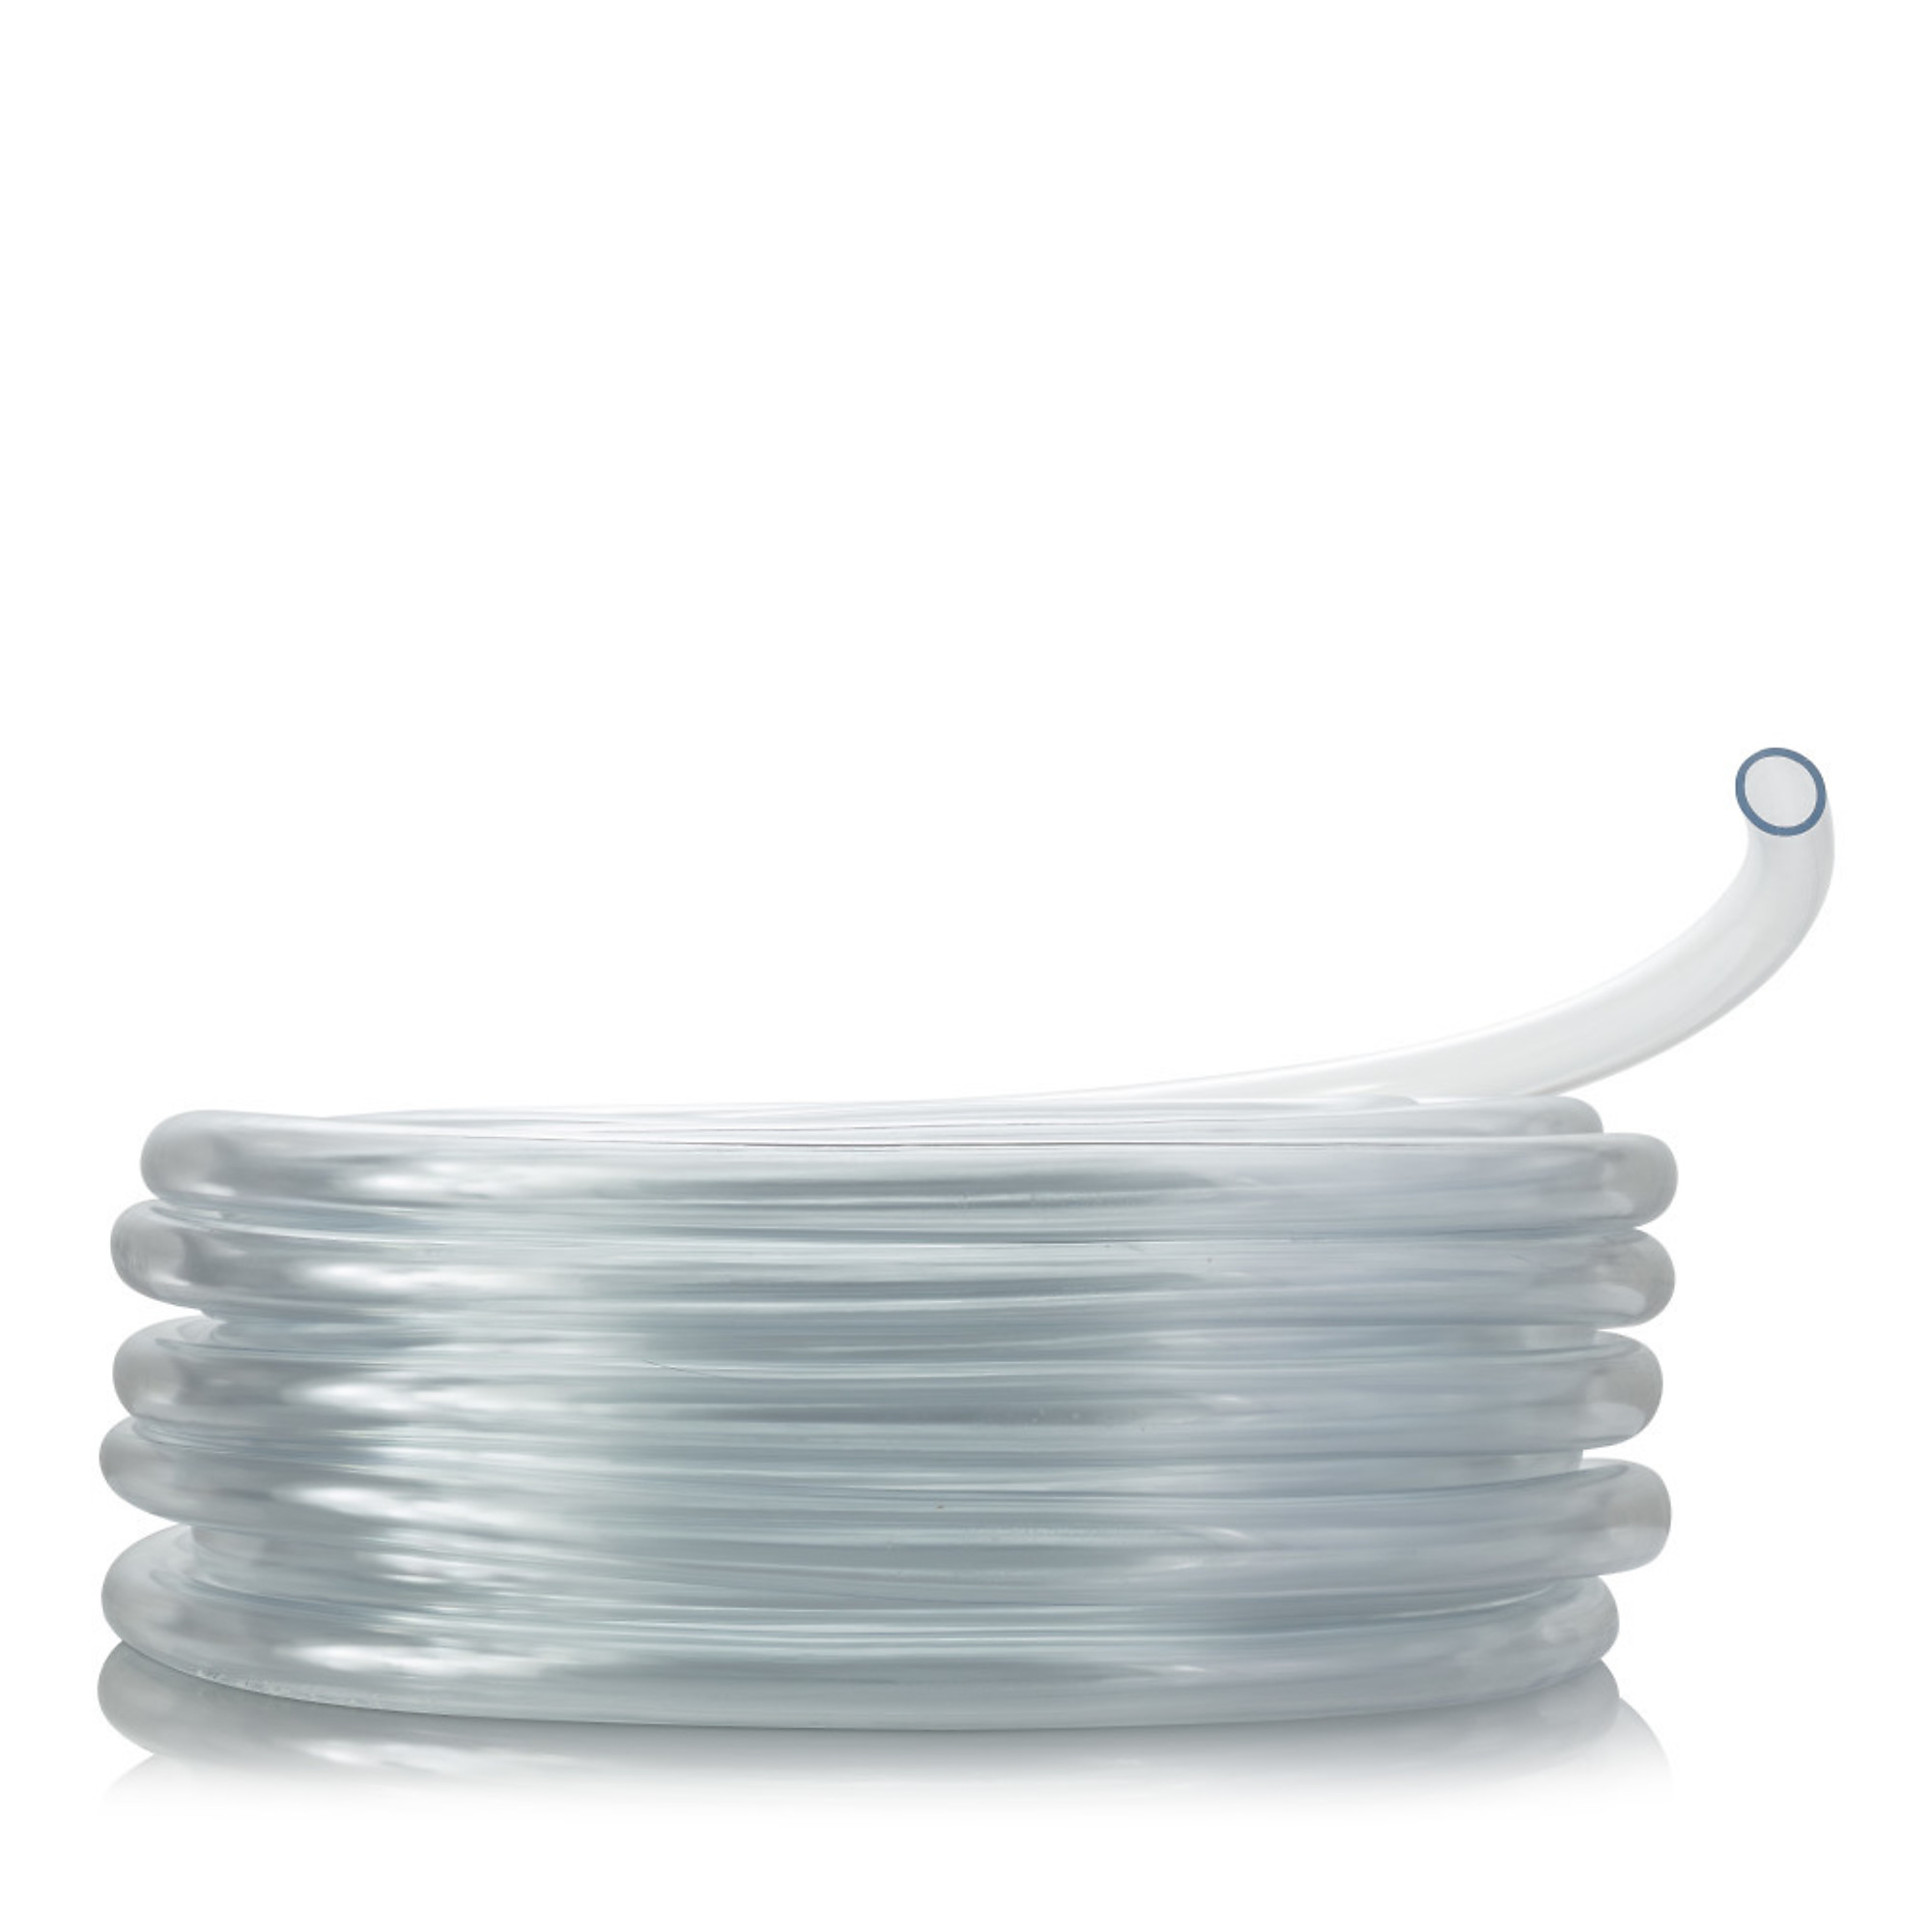 Alpine Corporation, 1/2Inch I.D. x 3/4Inch Wall PVC Clear Tubing x 100ft. Coil, Model V0127P